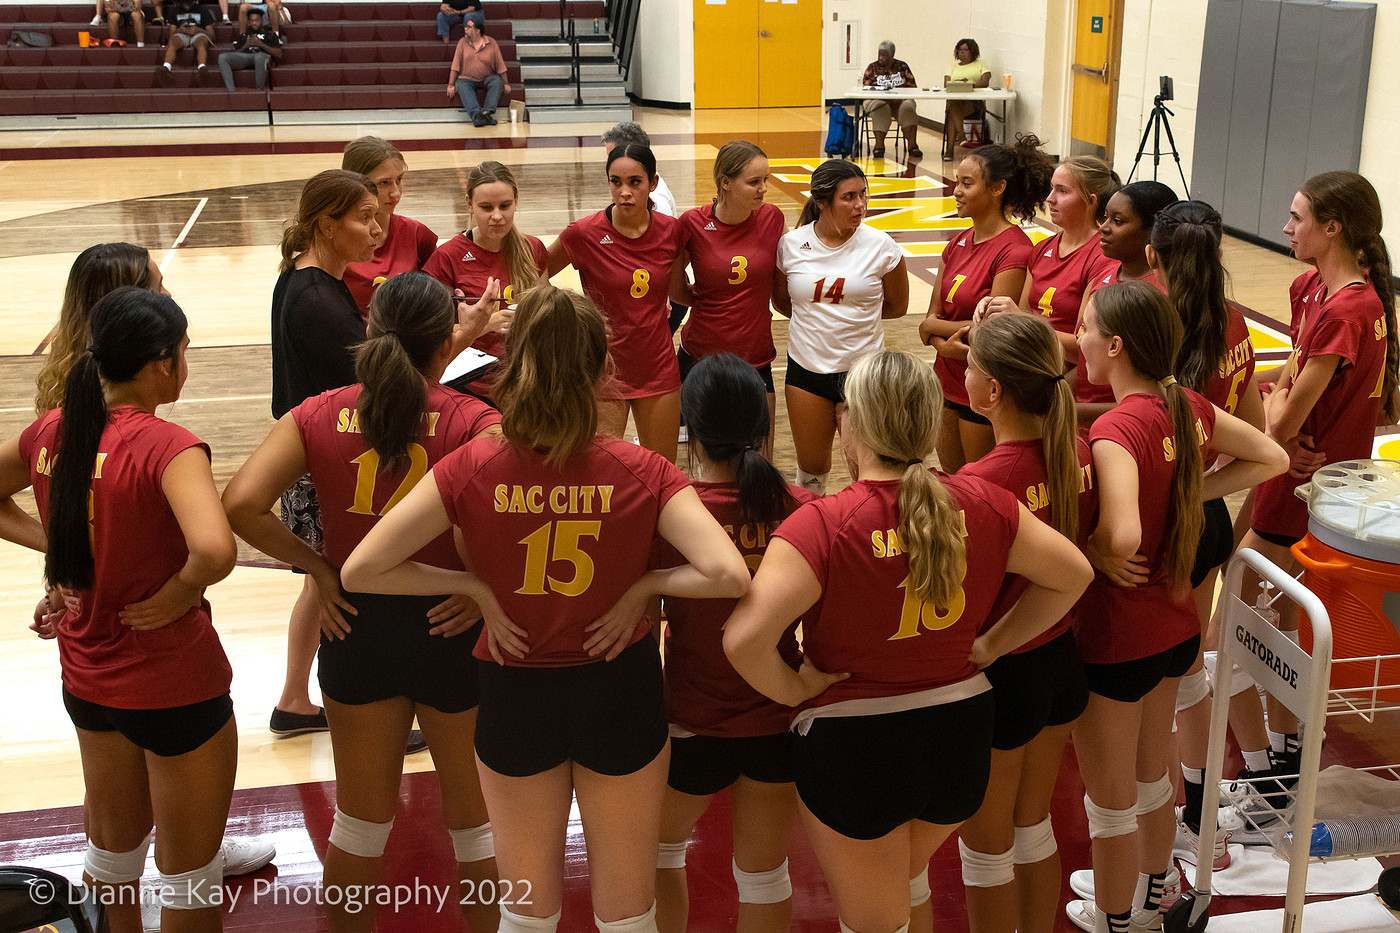 The Panthers knock off the host Renegades at the Ohlone Classic 3-1 (25-14, 25-15, 21-25, 25-14)